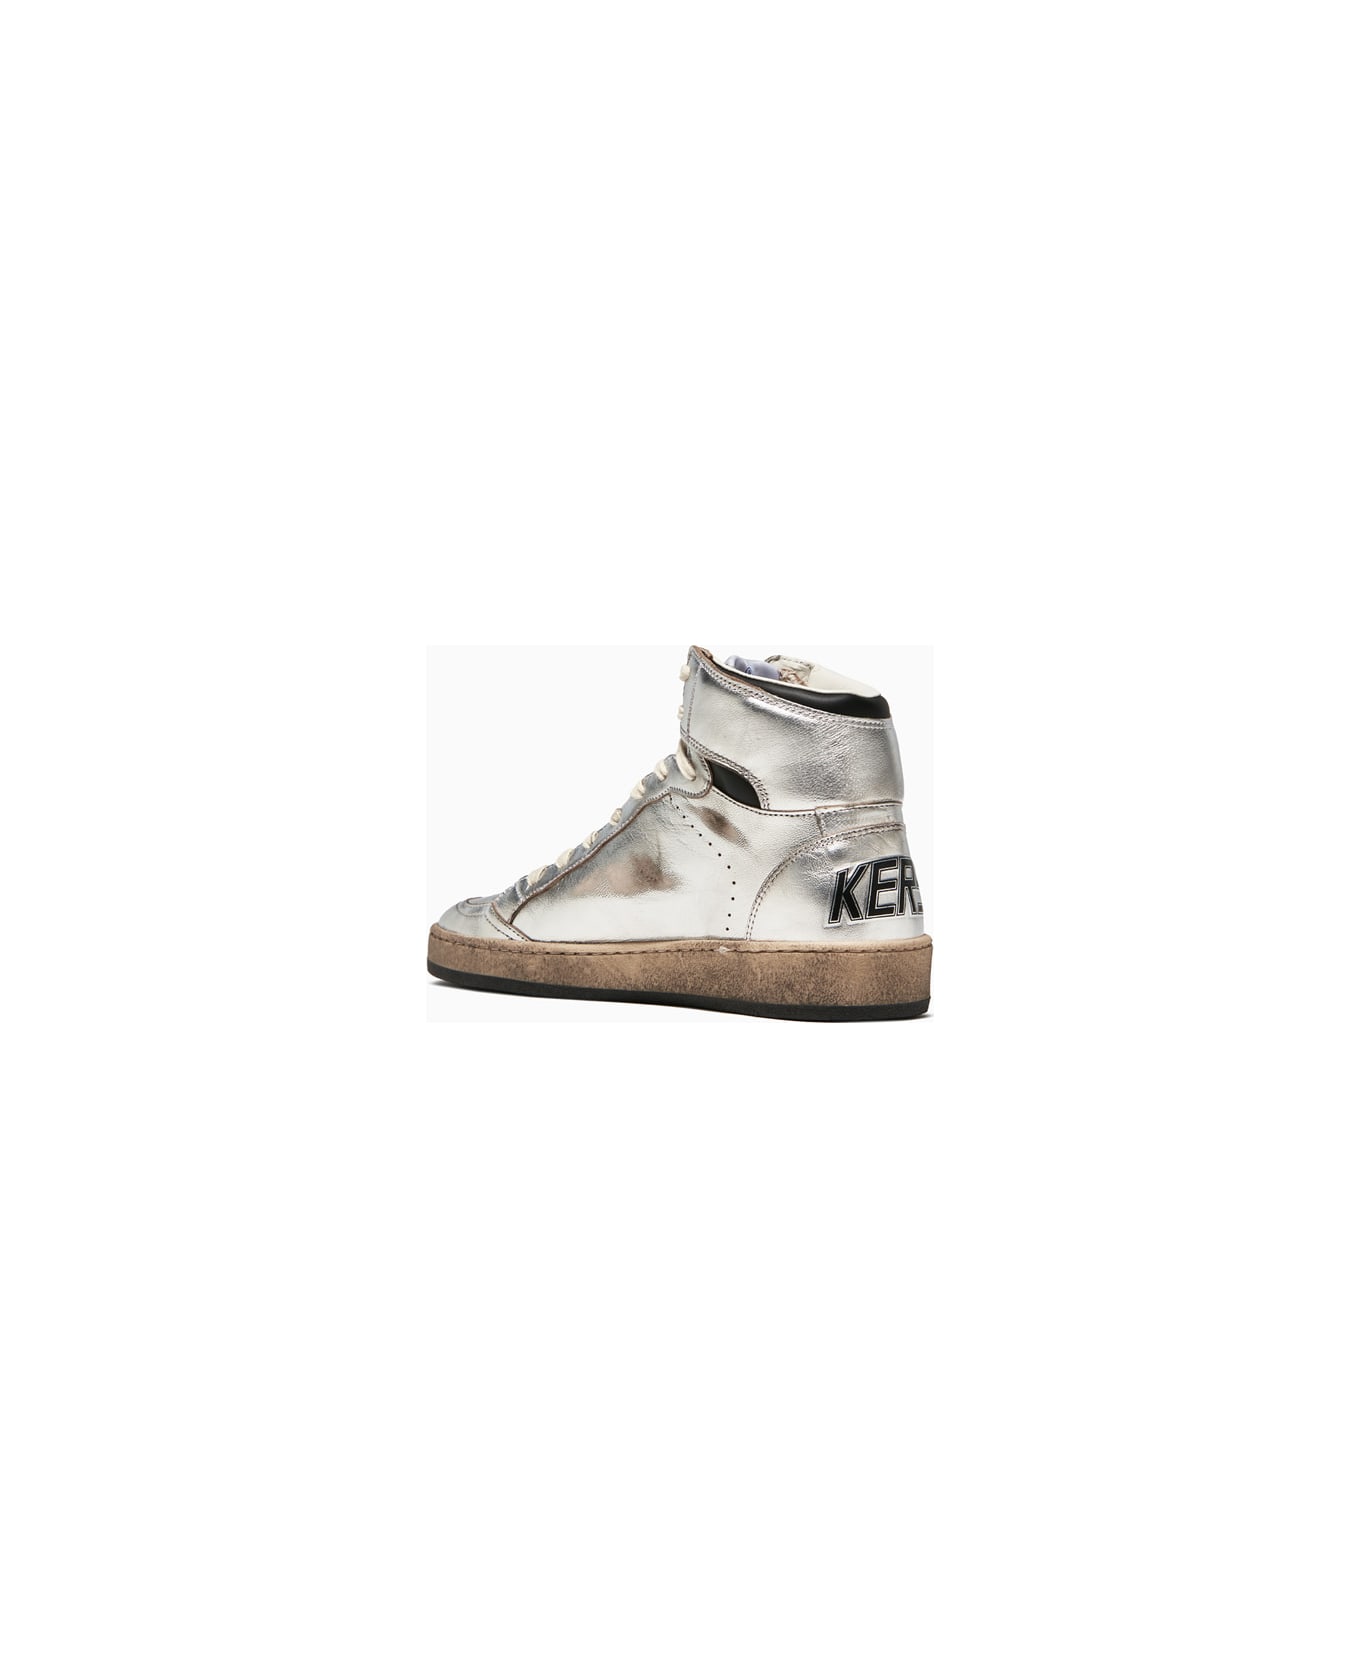 Golden Goose Sky Star Laminate Sneakers Gwf00230.f002943.60246 - 60246